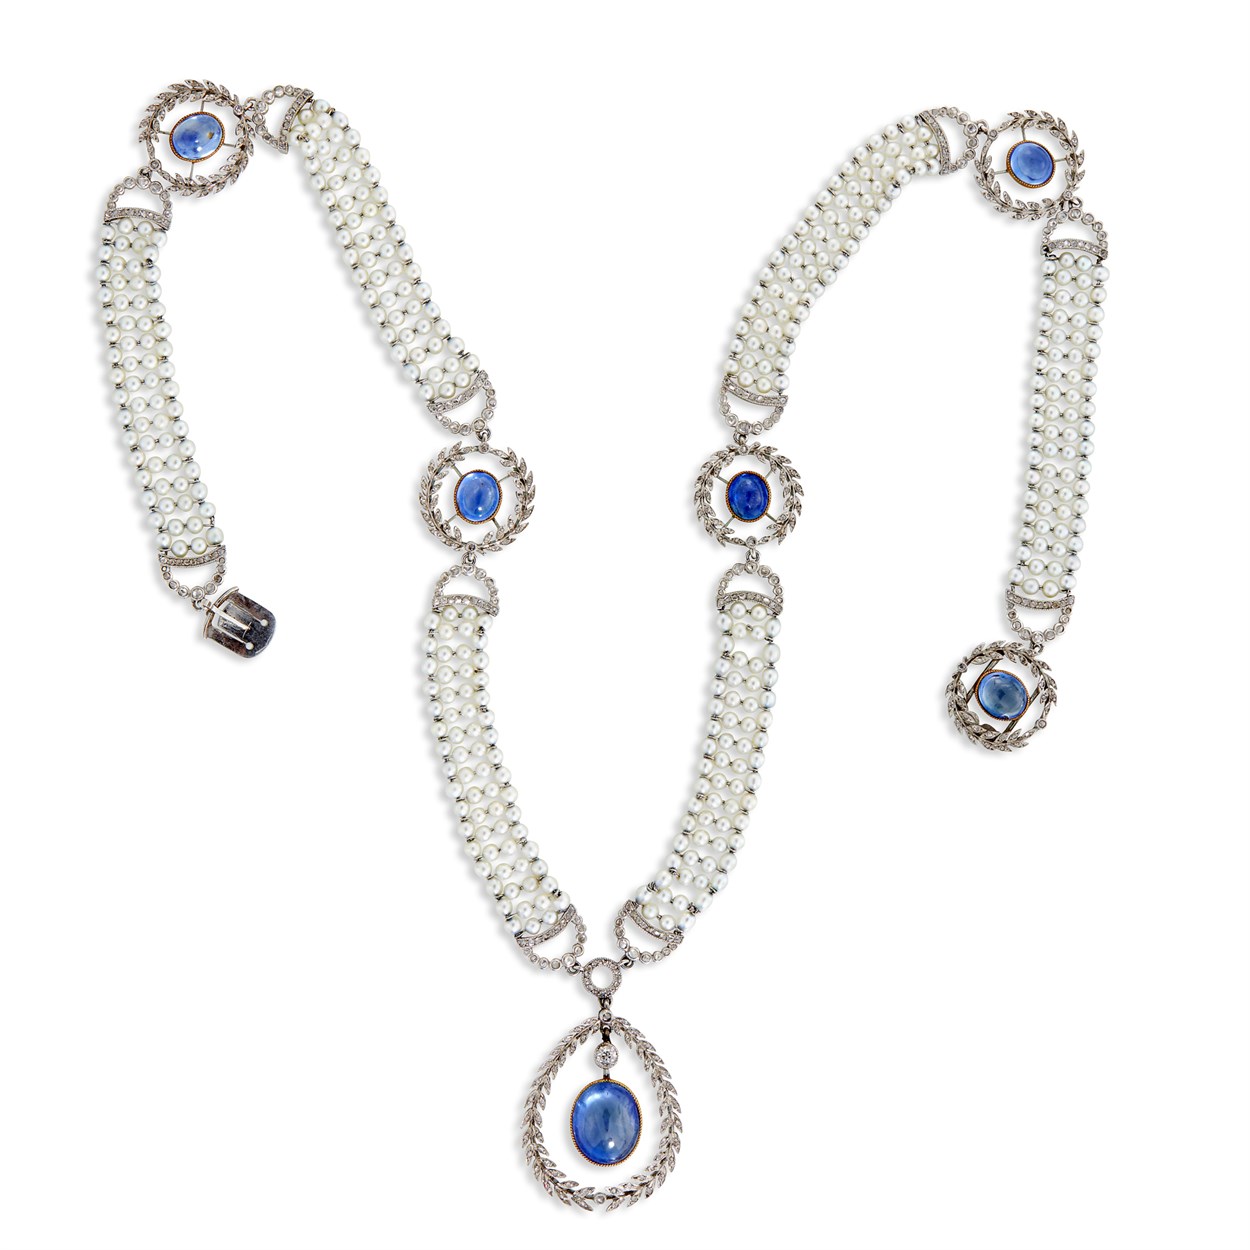 Lot 54 - A Belle Époque seed pearl, sapphire, and diamond necklace